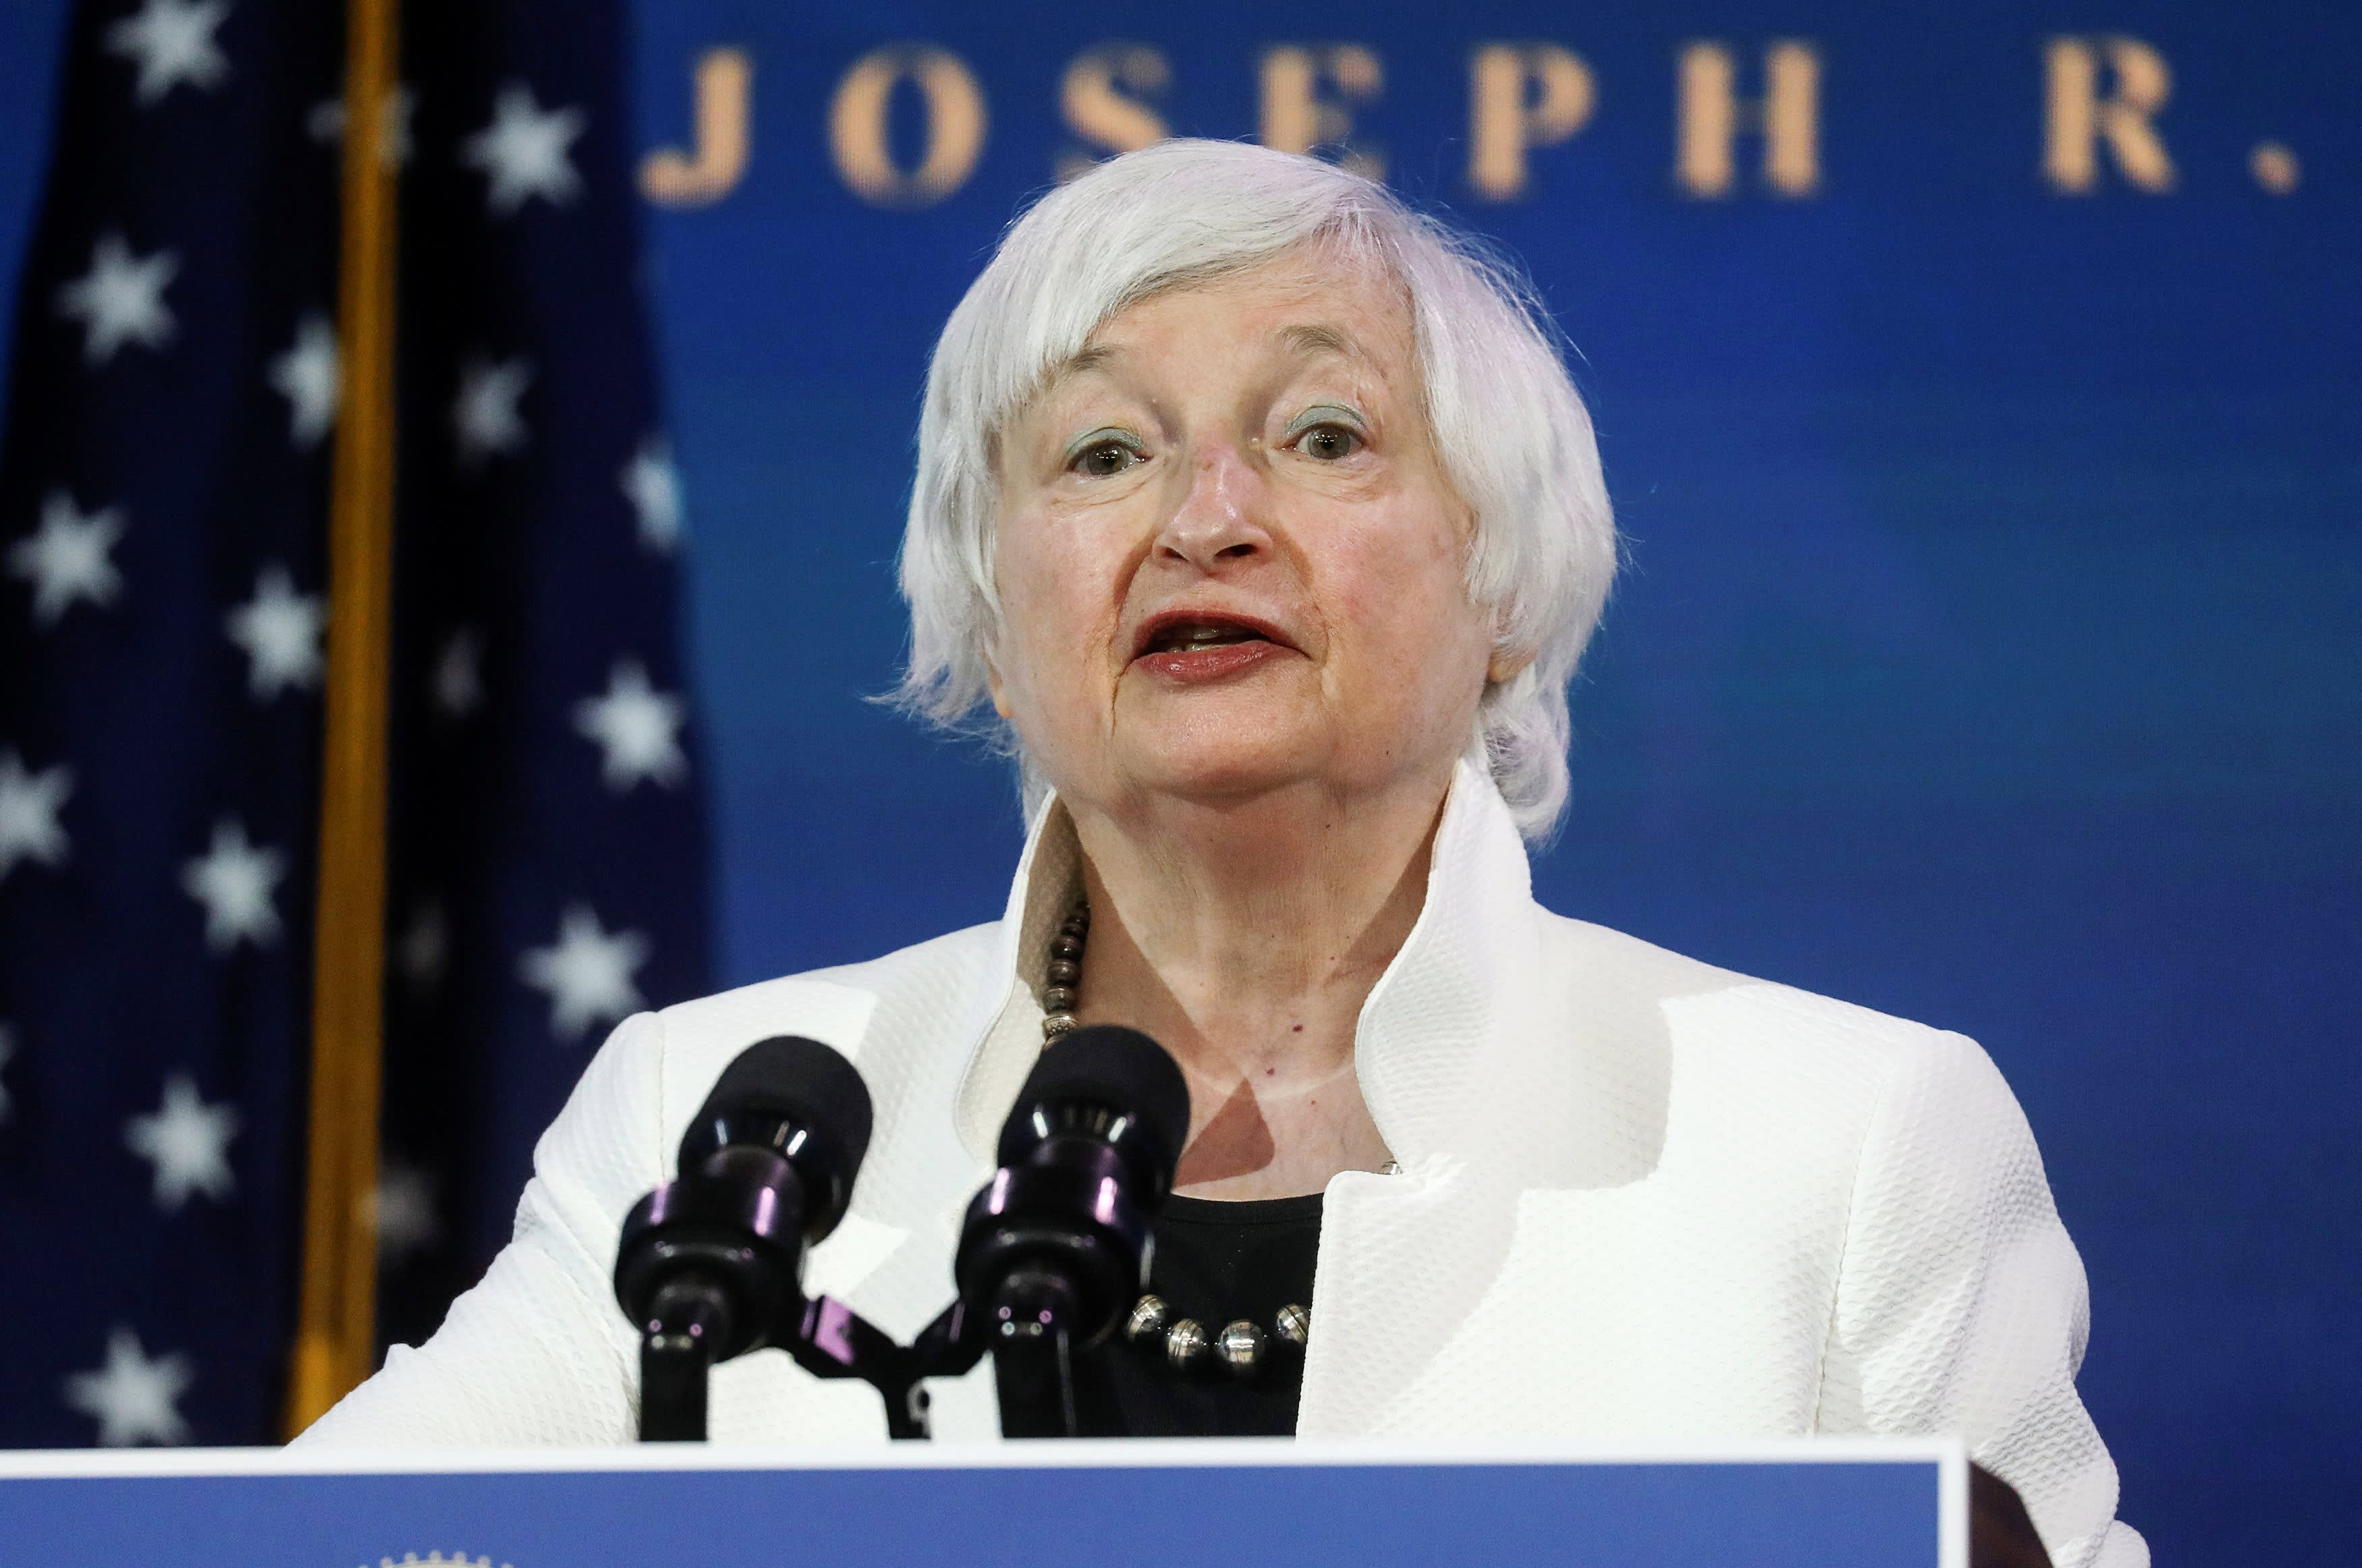 The appointment of Janet Yellen as the first female Treasury Secretary removes the main obstacle of the Senate